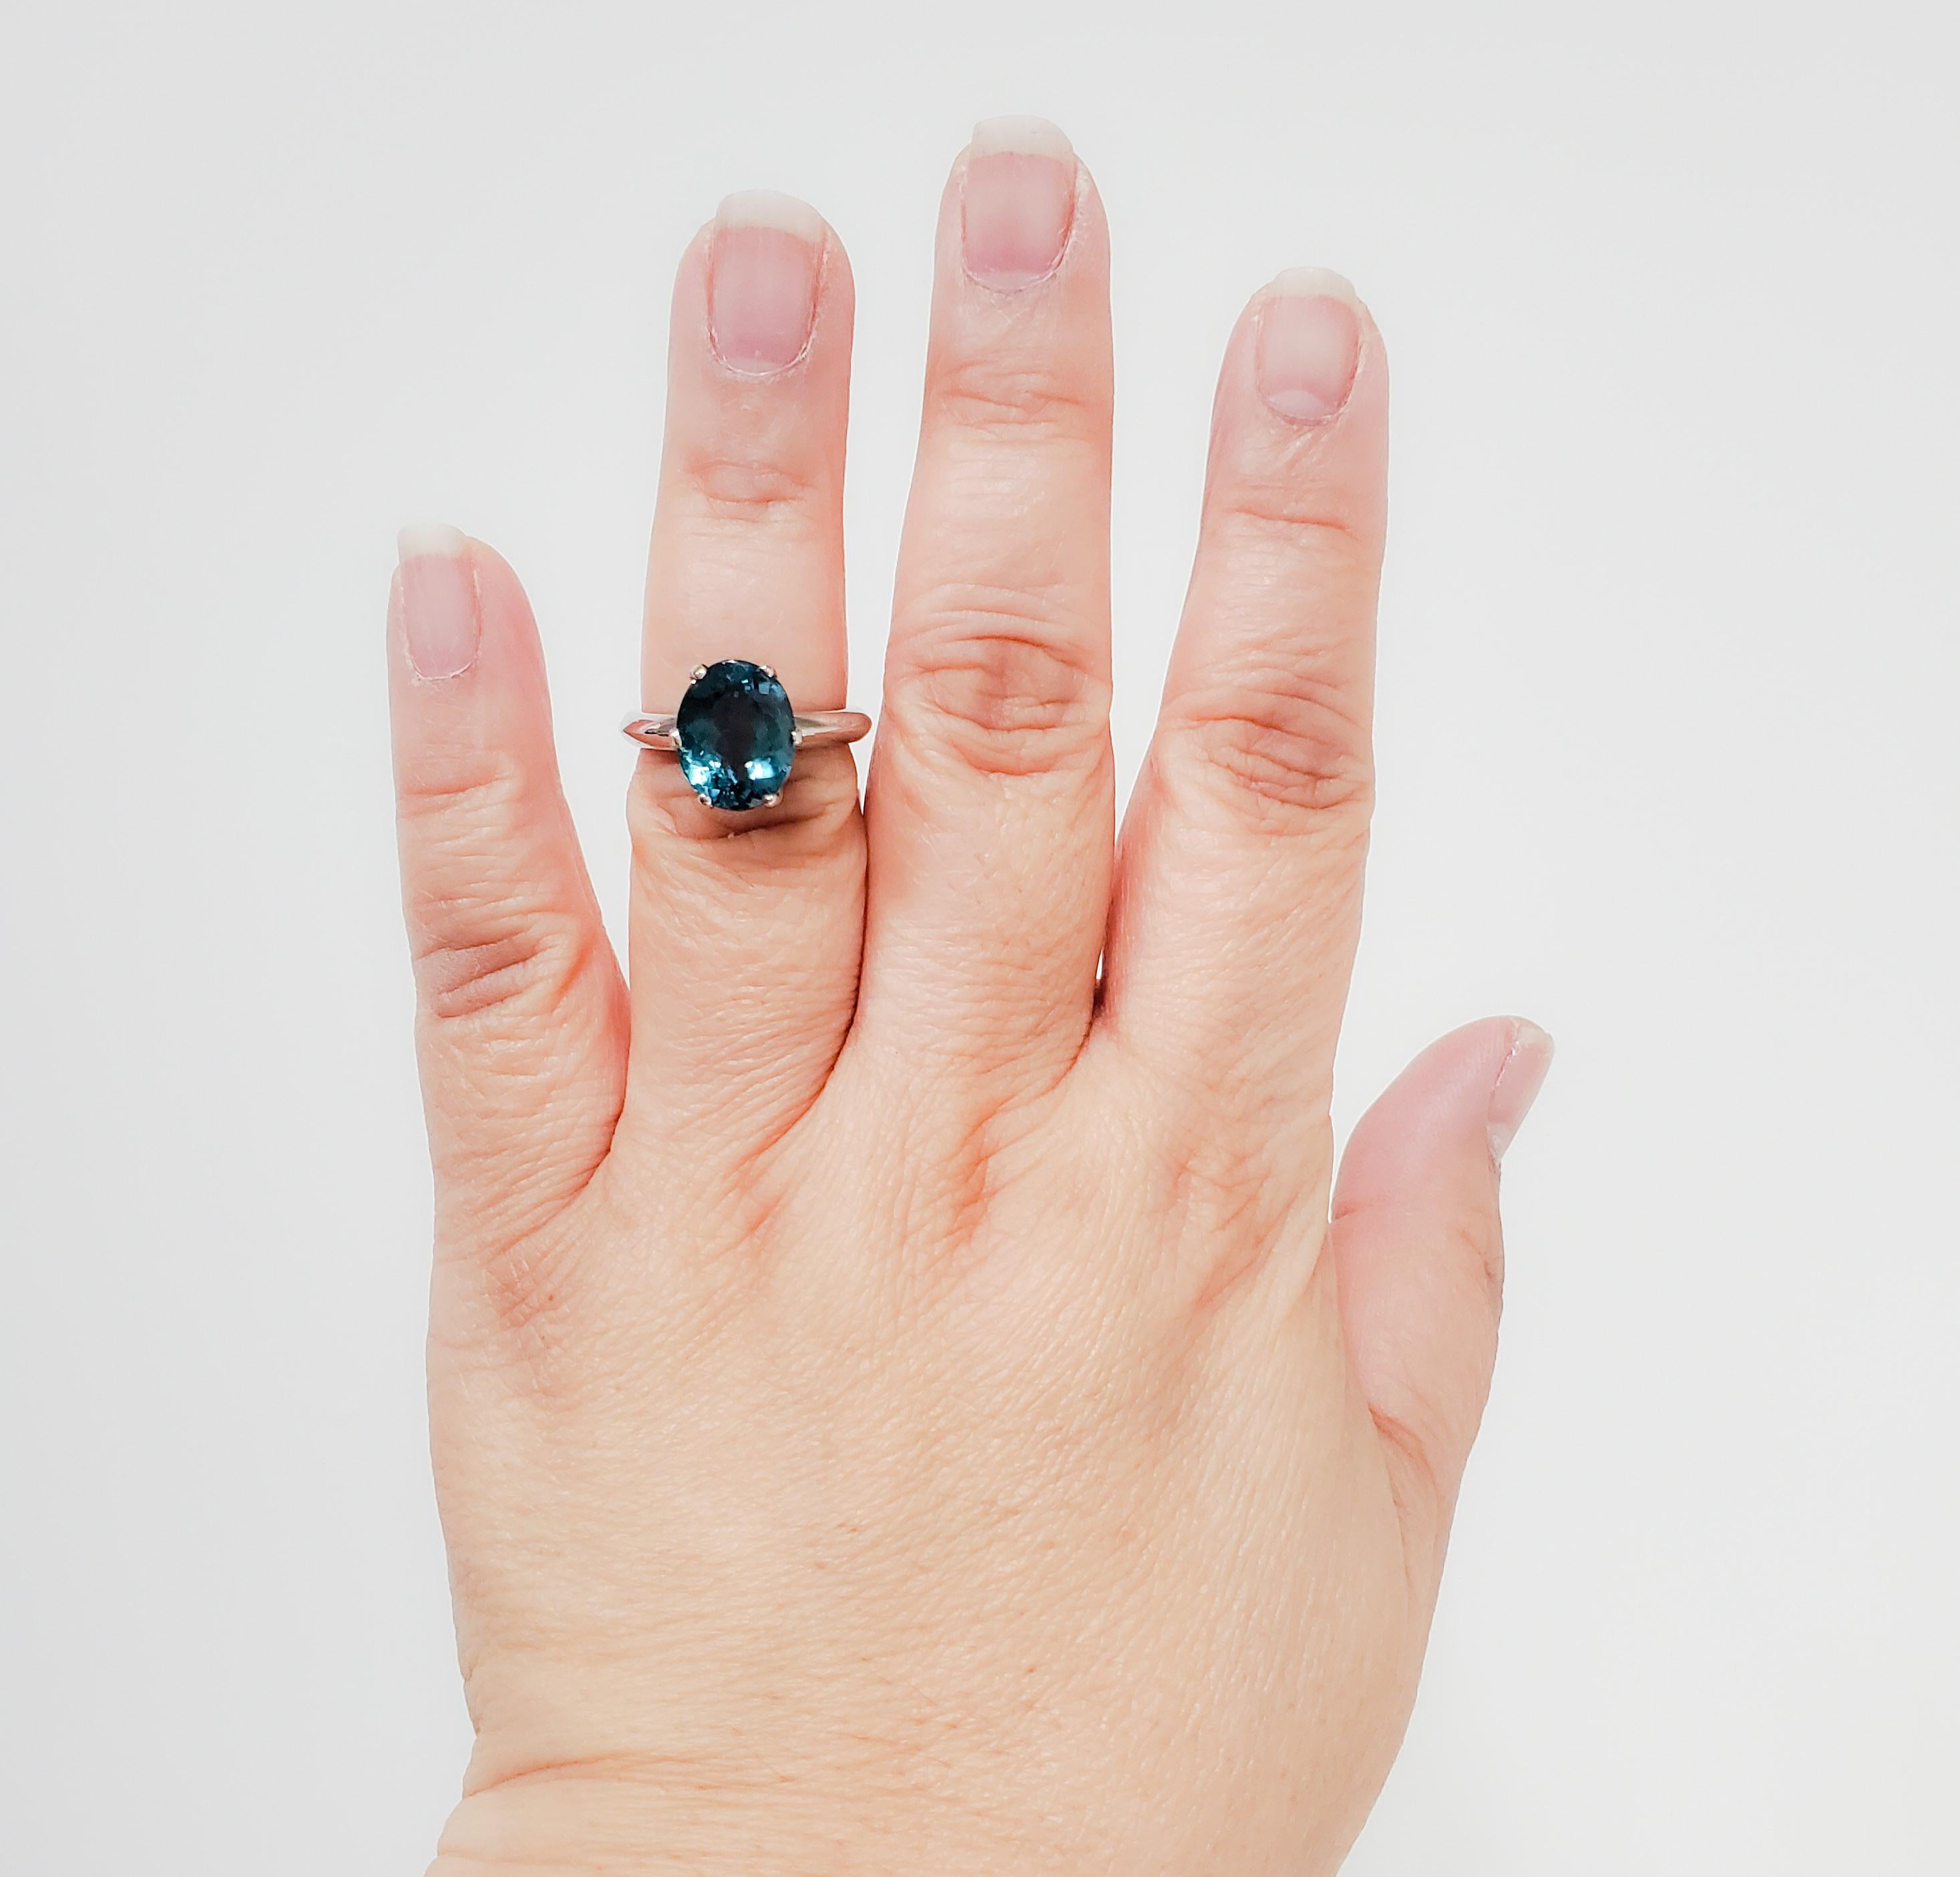 Gorgeous 5.36 ct. indicolite tourmaline oval with a rich unique color.  Handmade platinum mounting.  Ring size 7.